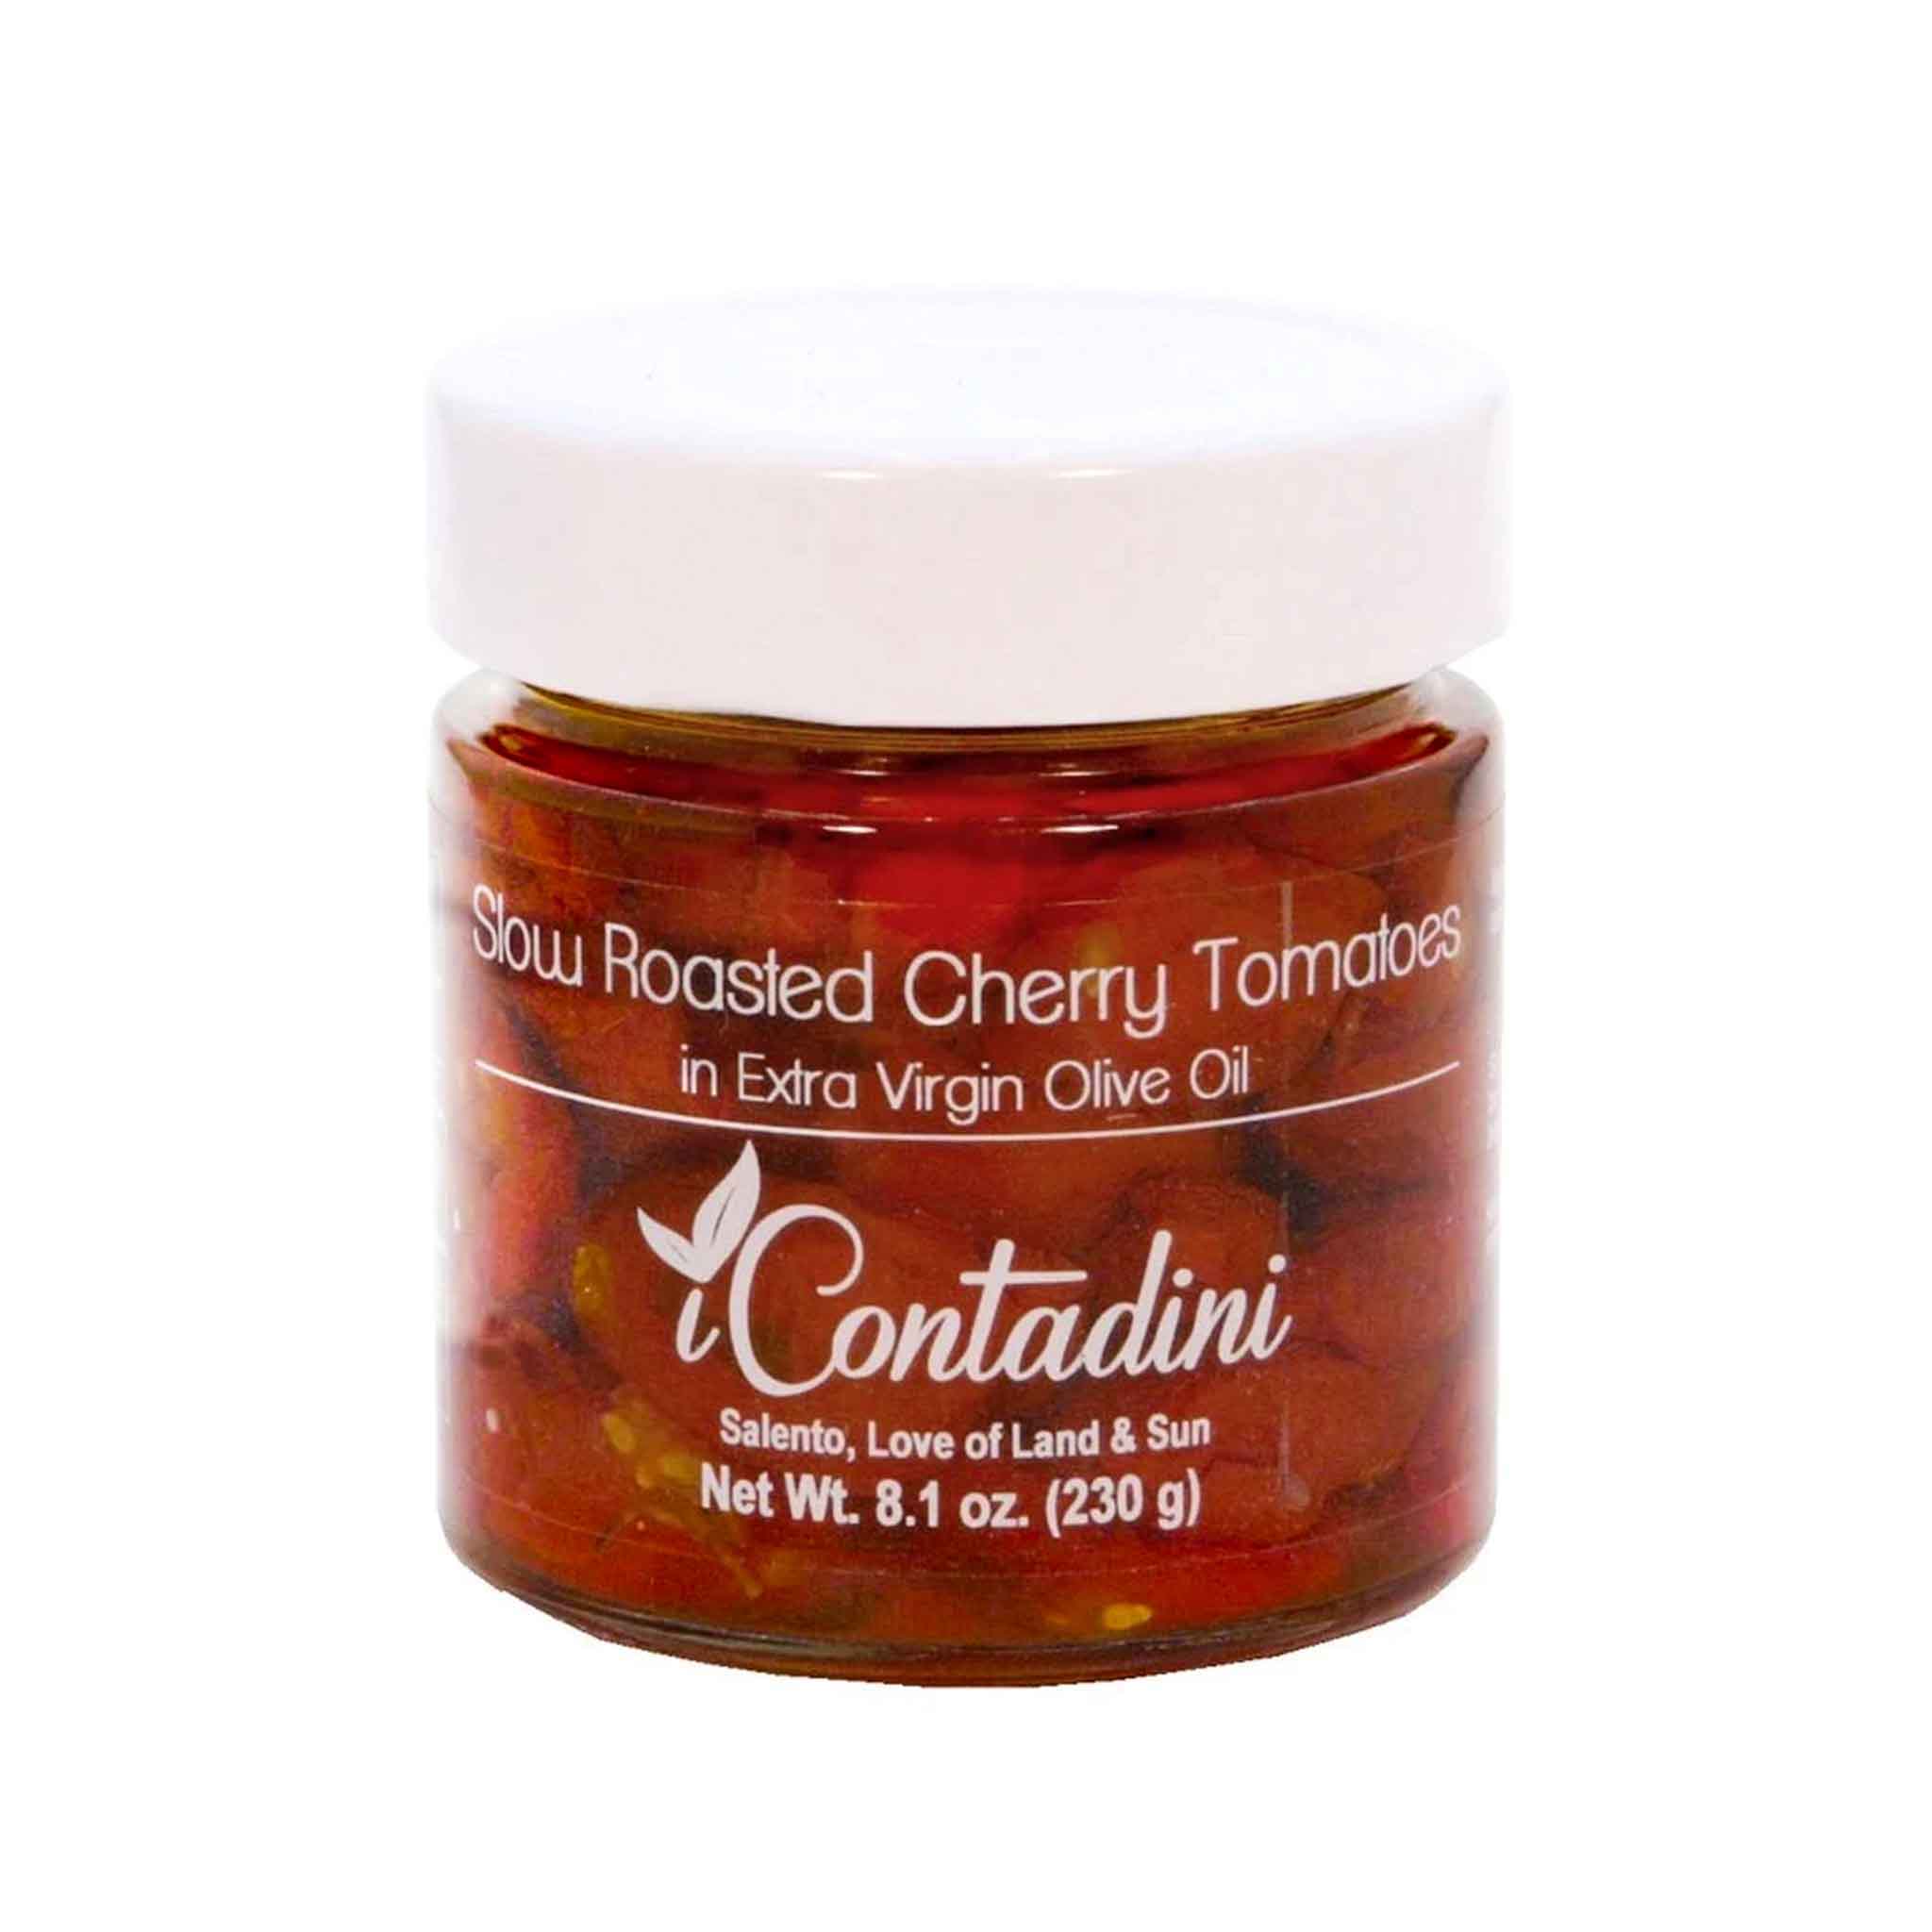 Contadini Roasted Cherry Tomatoes in a Glass Jar